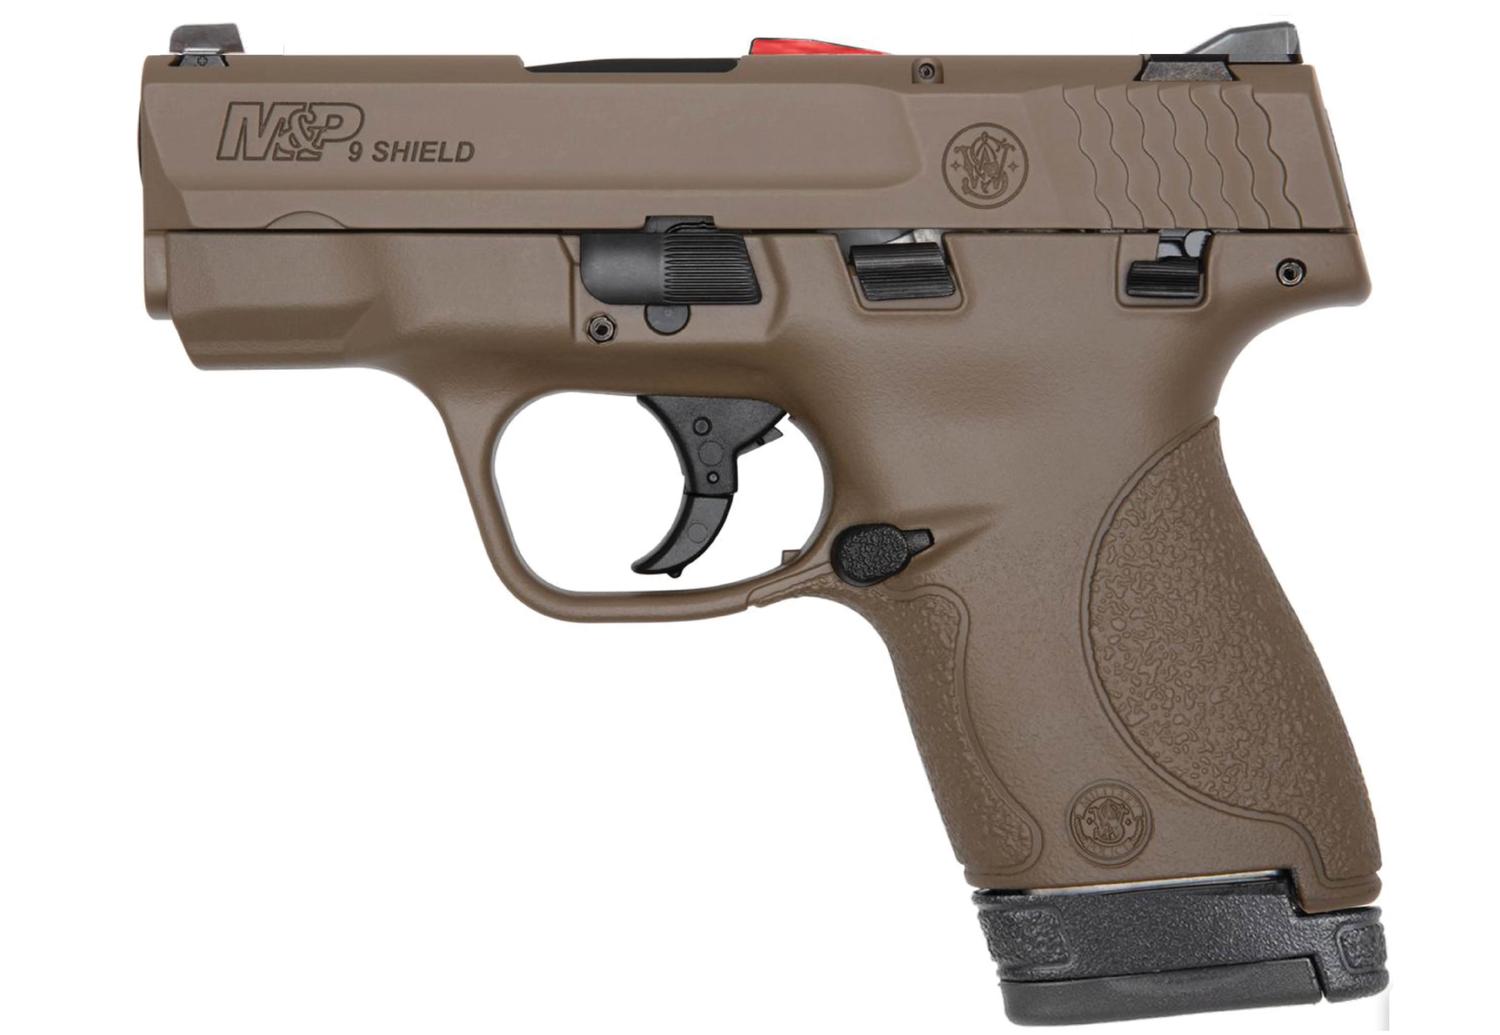  Exclusive - M & P9 Shield 9mm 3.1in - Fde W/Standard Sights